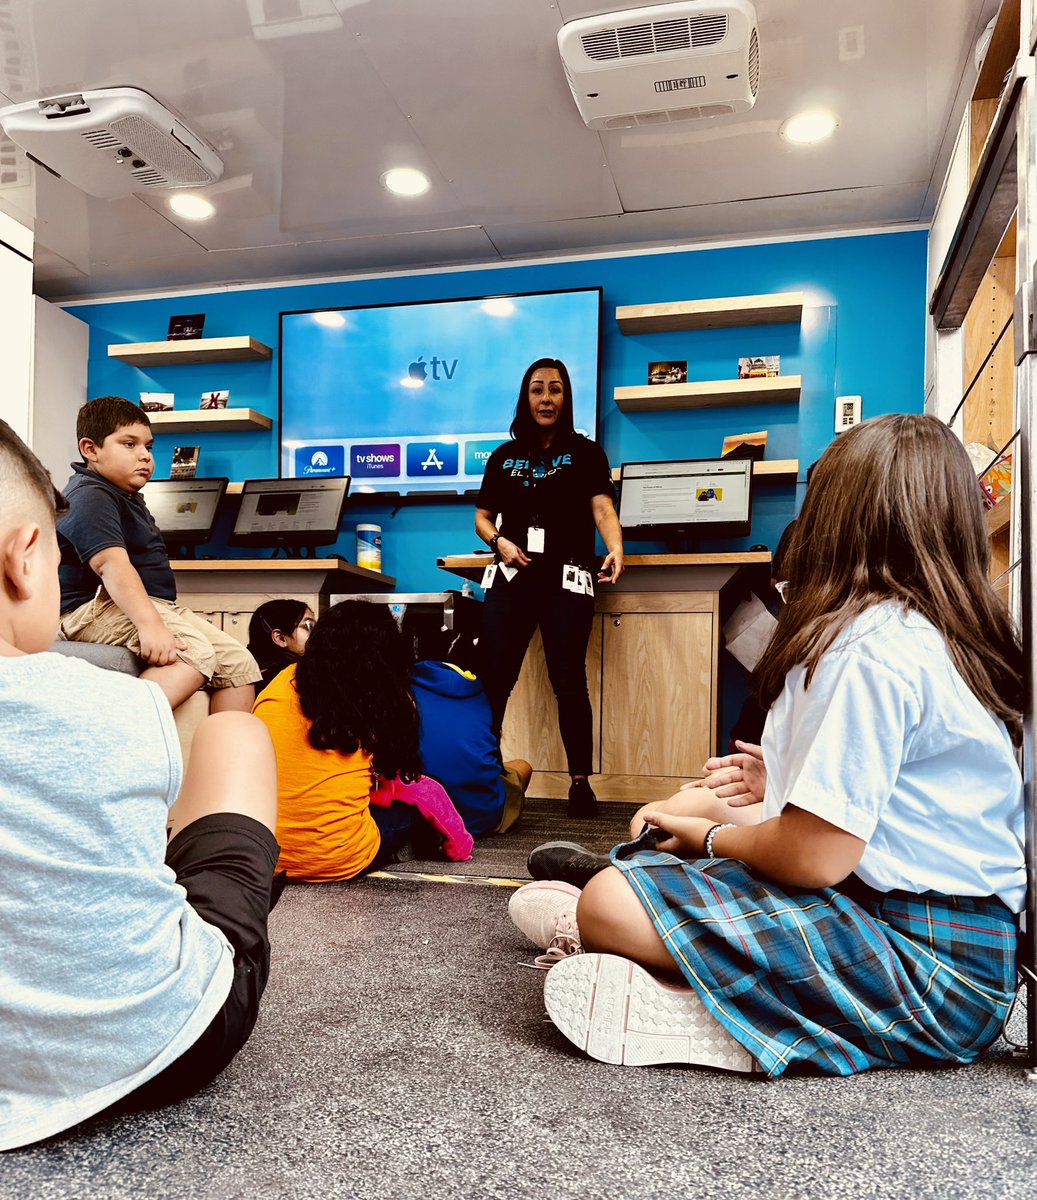 Spent yesterday afternoon with the kids of the Boys & Girls Club El Paso educating on digital safety.  Such an inspiring group.  They’re getting ready to take on the world! #BoysAndGirlsClub #DigitalDivide #LifeAtATT